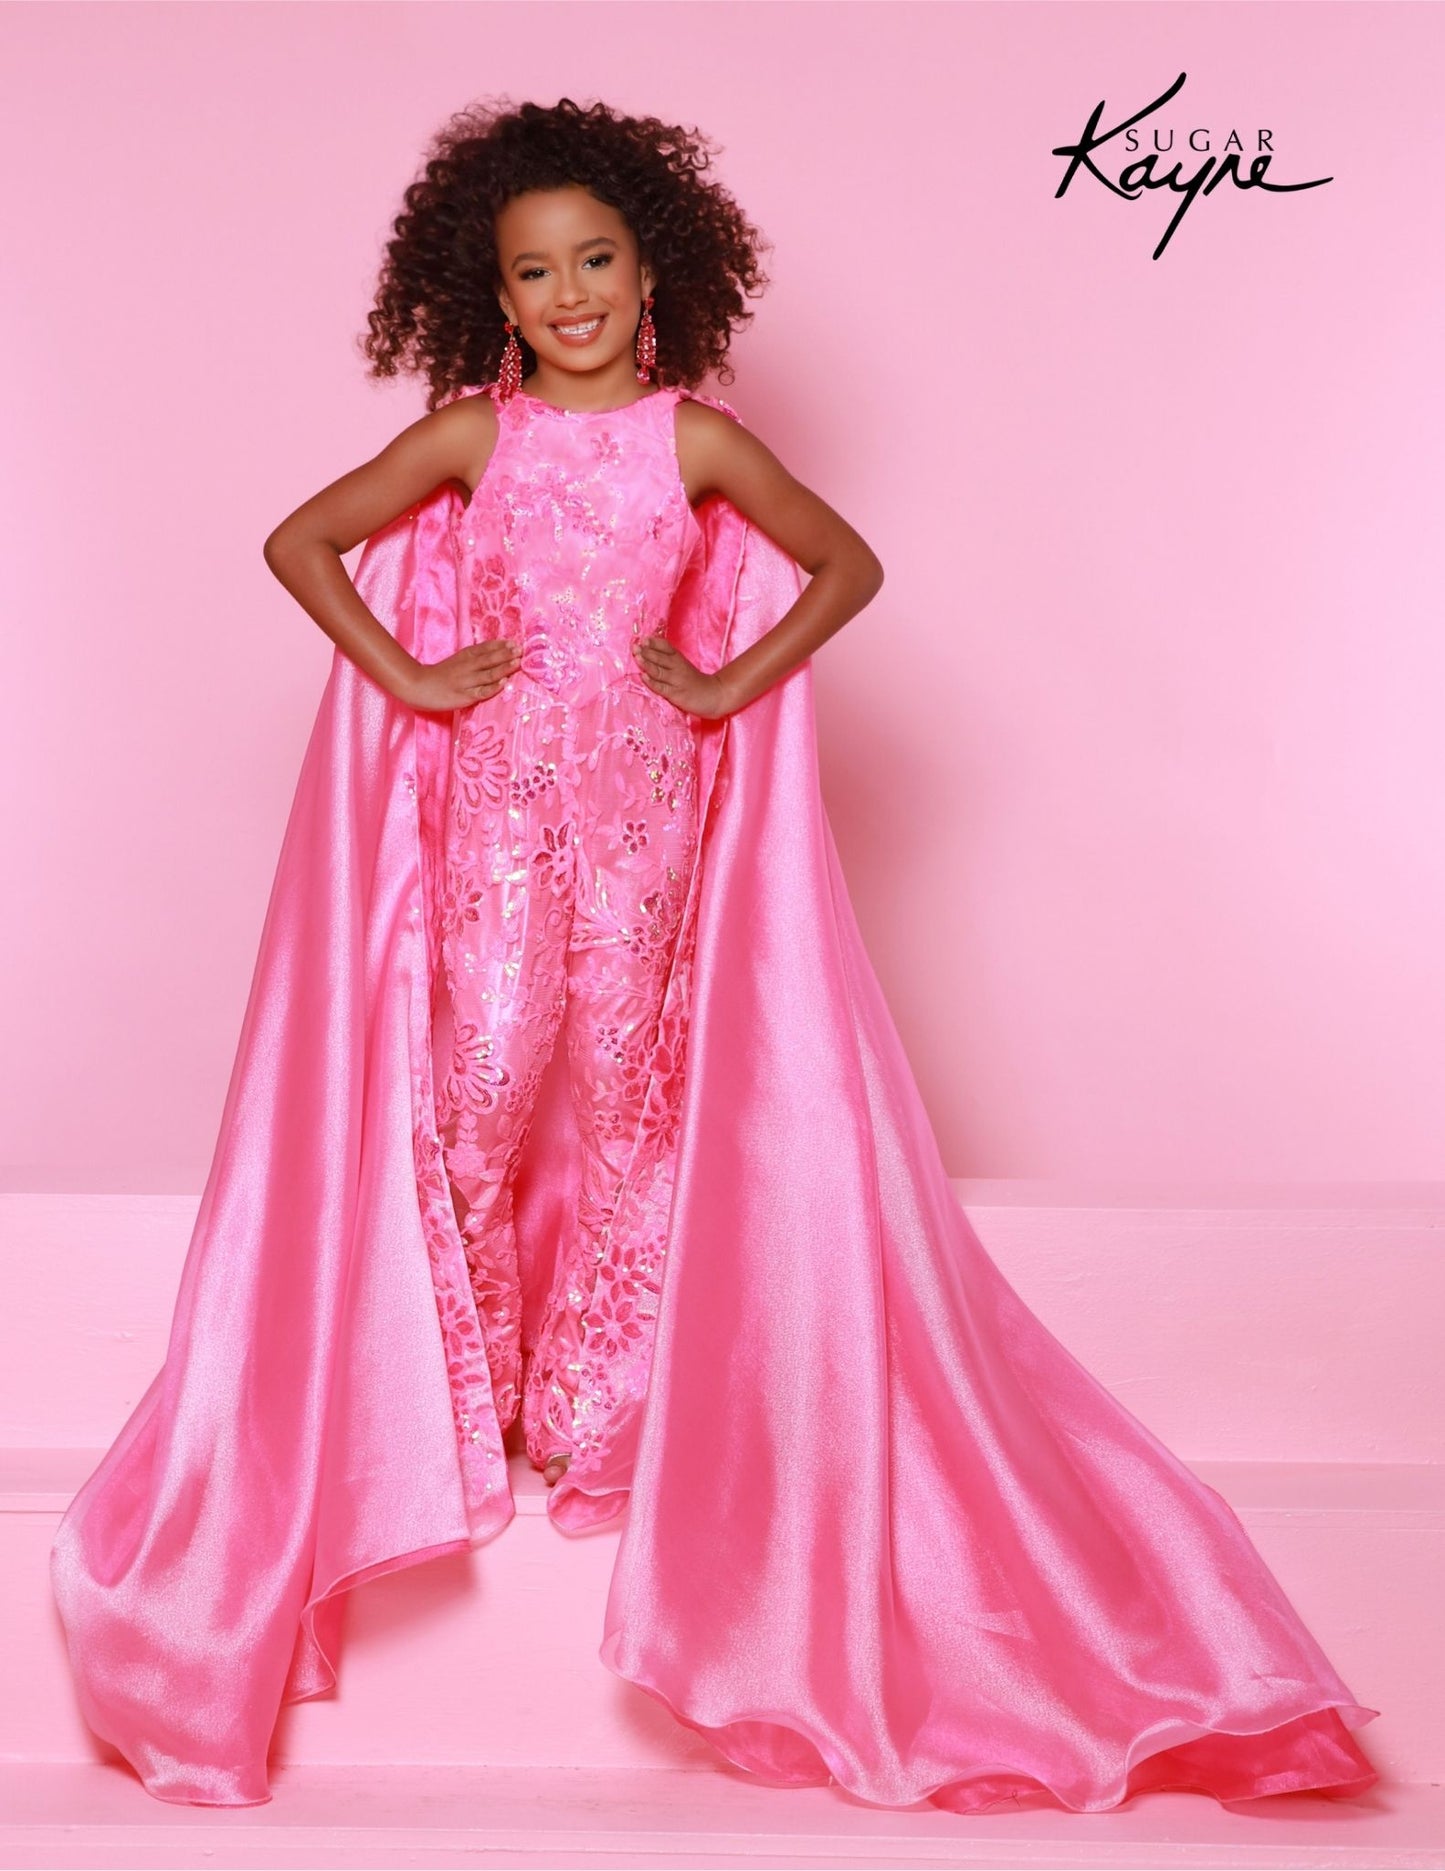 This beautiful Sugar Kayne C337 pageant jumpsuit makes the perfect statement for special events. It features a stunning sequin mesh with shimmer organza cape for a magical look. Perfect for formal functions, the durable fabric and flattering design guarantee a timeless look. Become a shimmer superstar and rock the stage in our Sequin Mesh and Shimmer Organza Jumpsuit. The detachable dazzling cape adds a super fun touch!